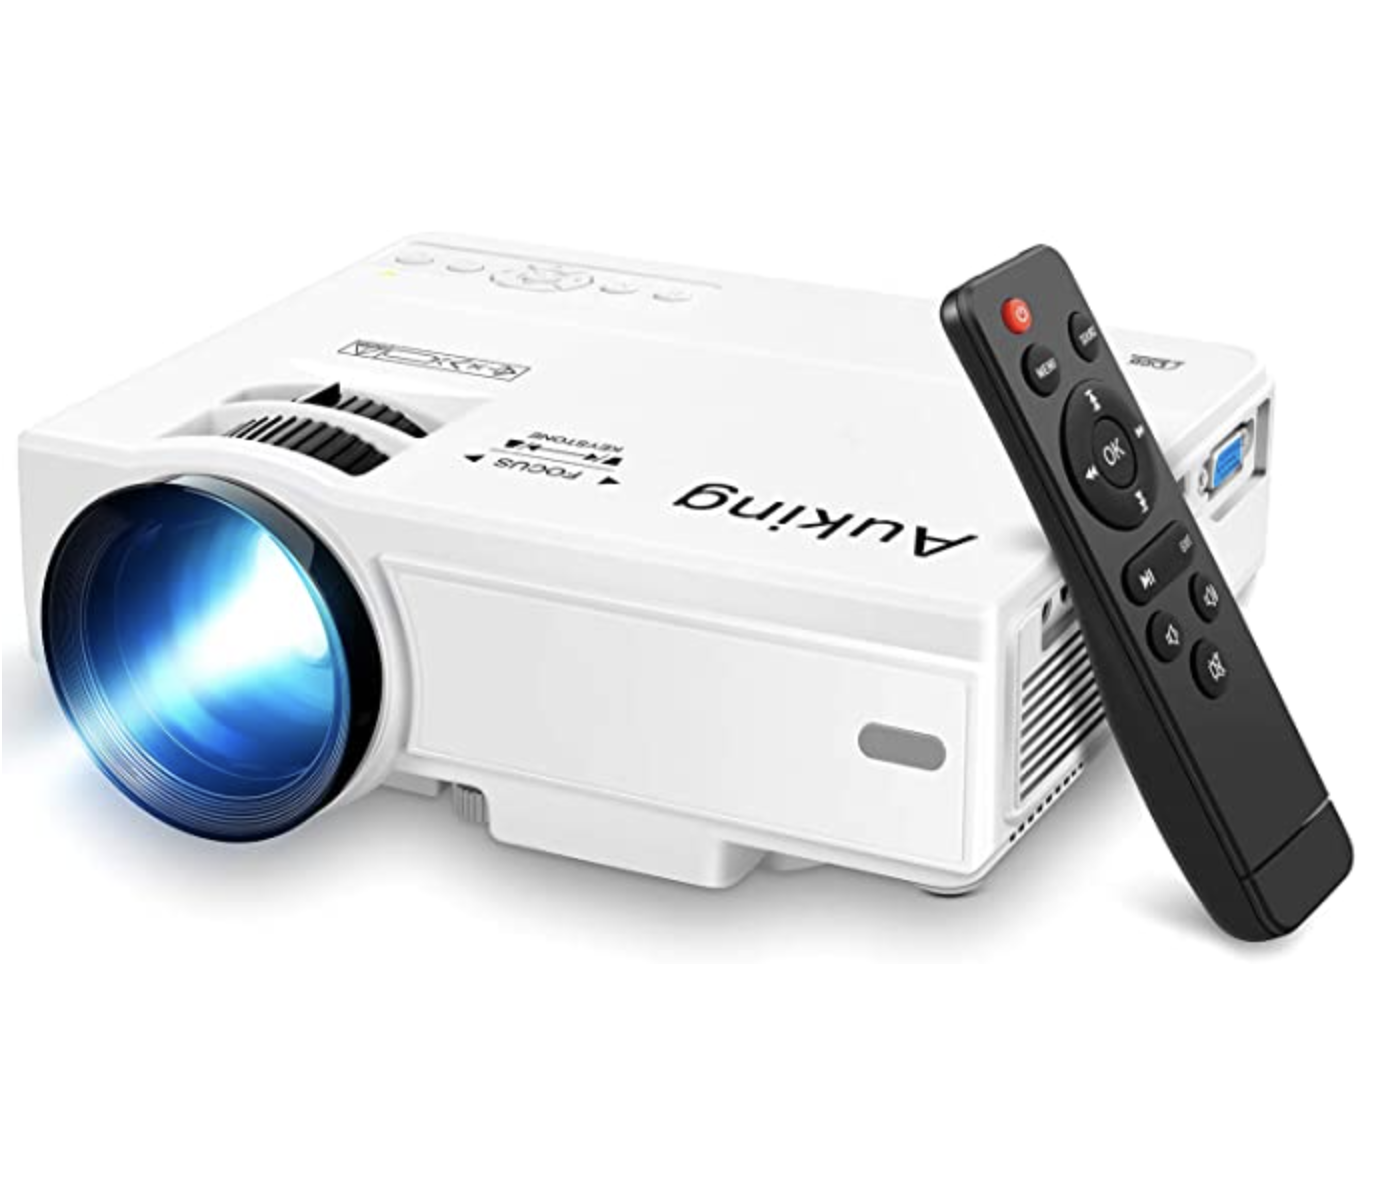 AuKing Tabletop Big Screen Mini Projector